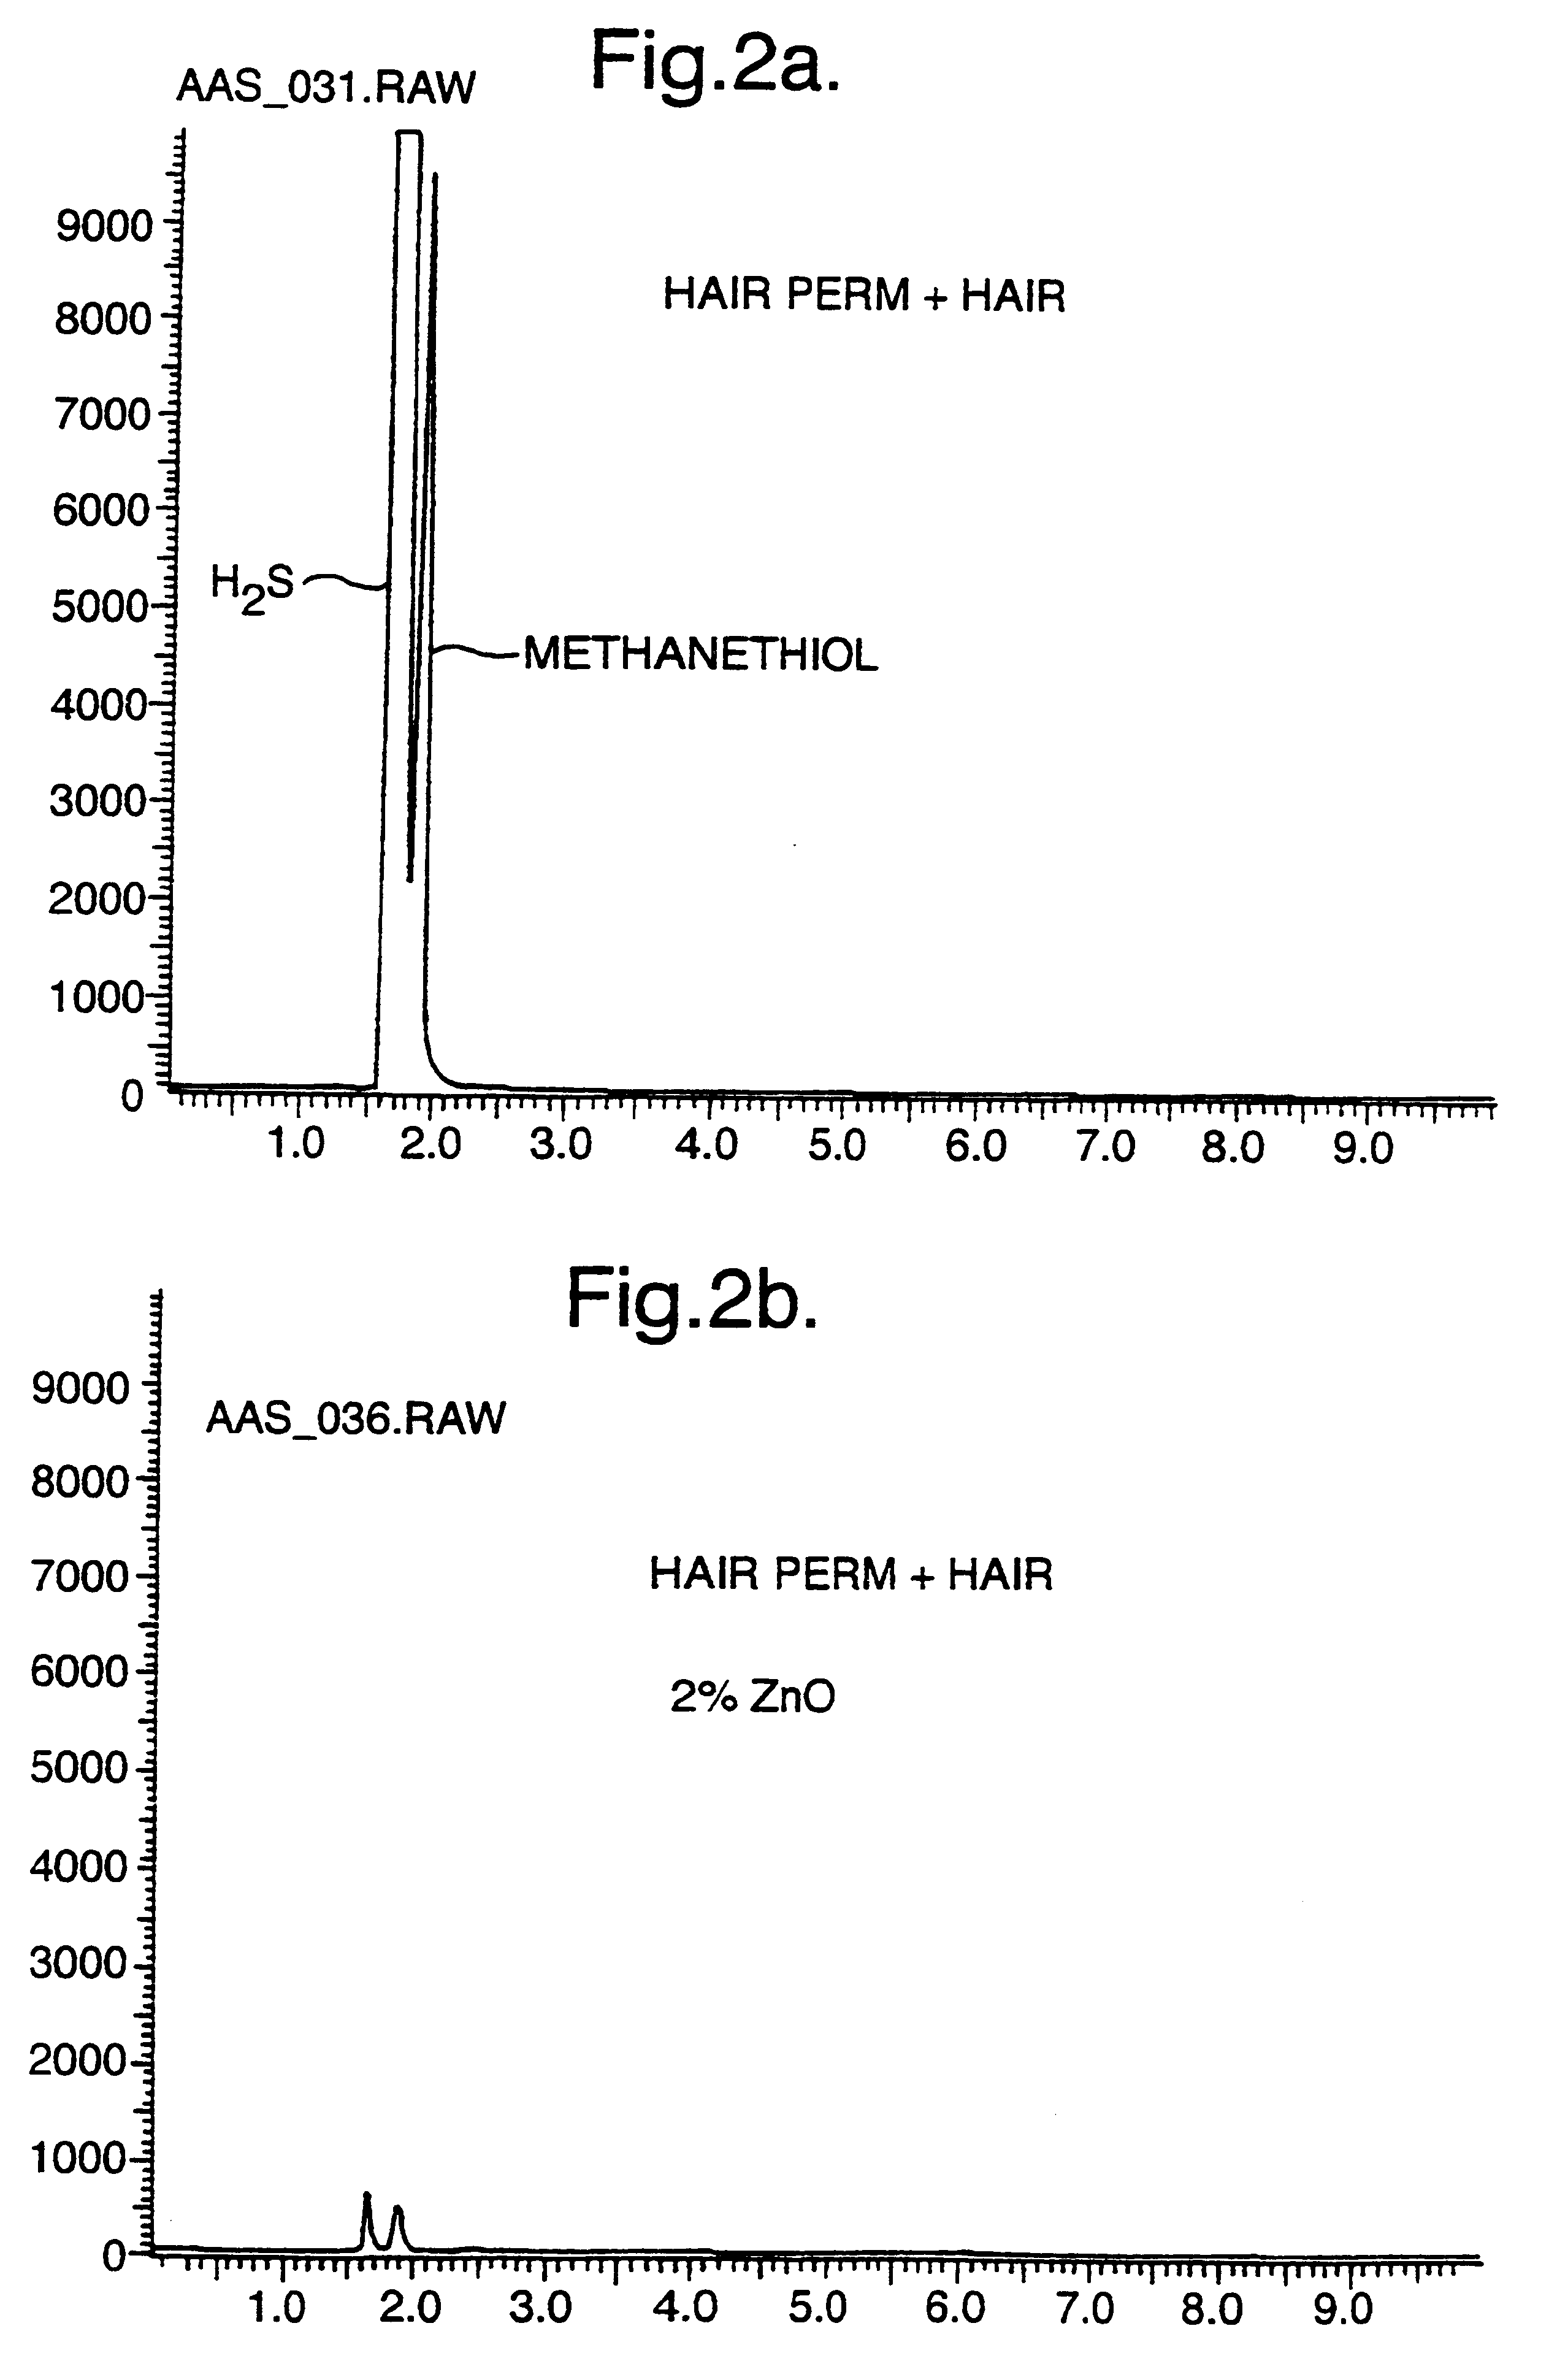 Hair treatment compositions containing reducing sulphur species and zinc compound